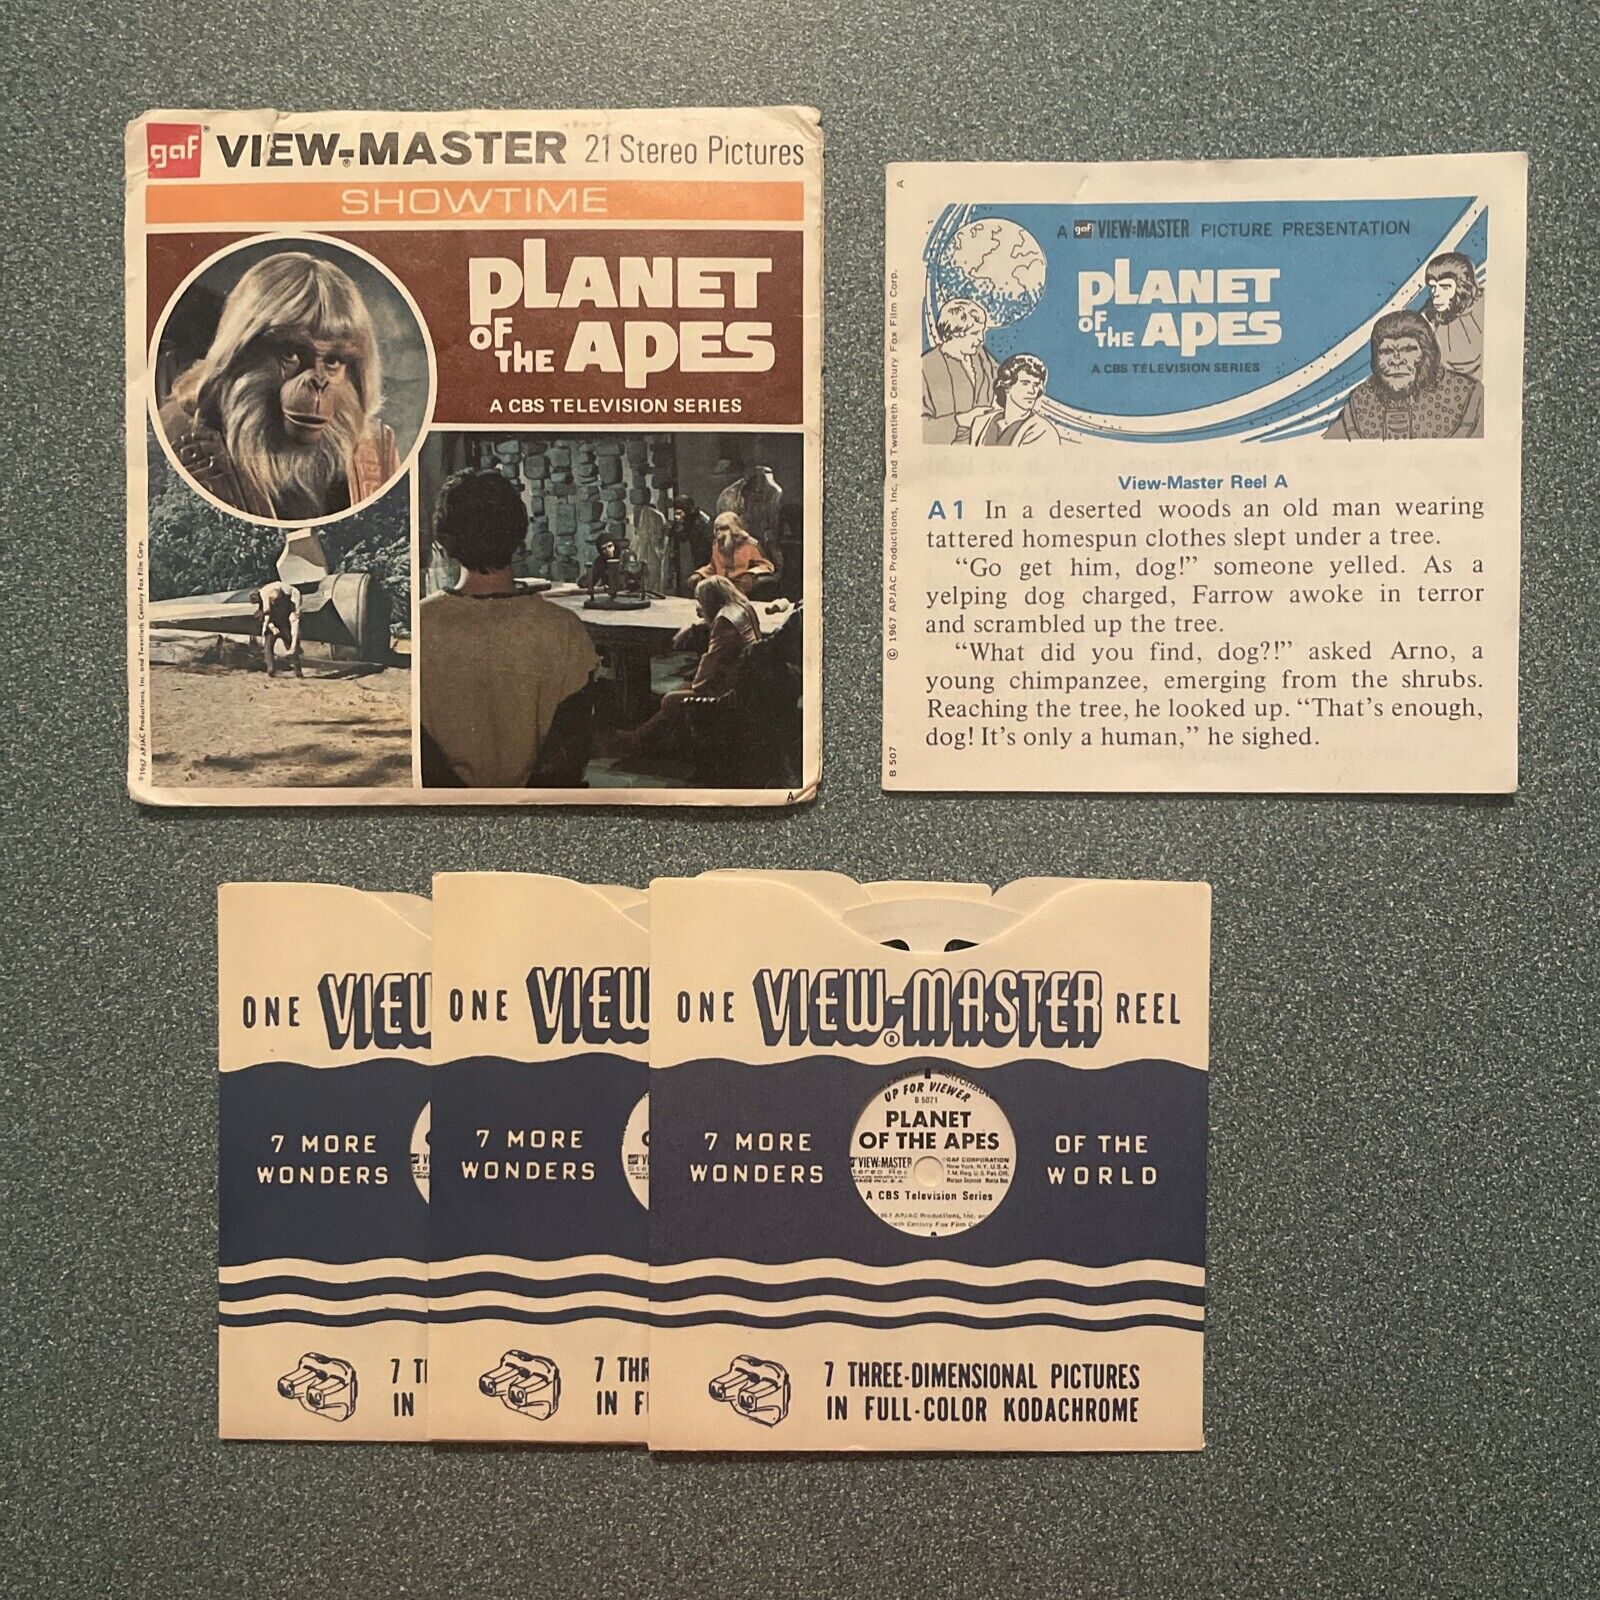 Vintage gaf B507 The Planet of the Apes CBS TV Show view-master 3 Reels Packet